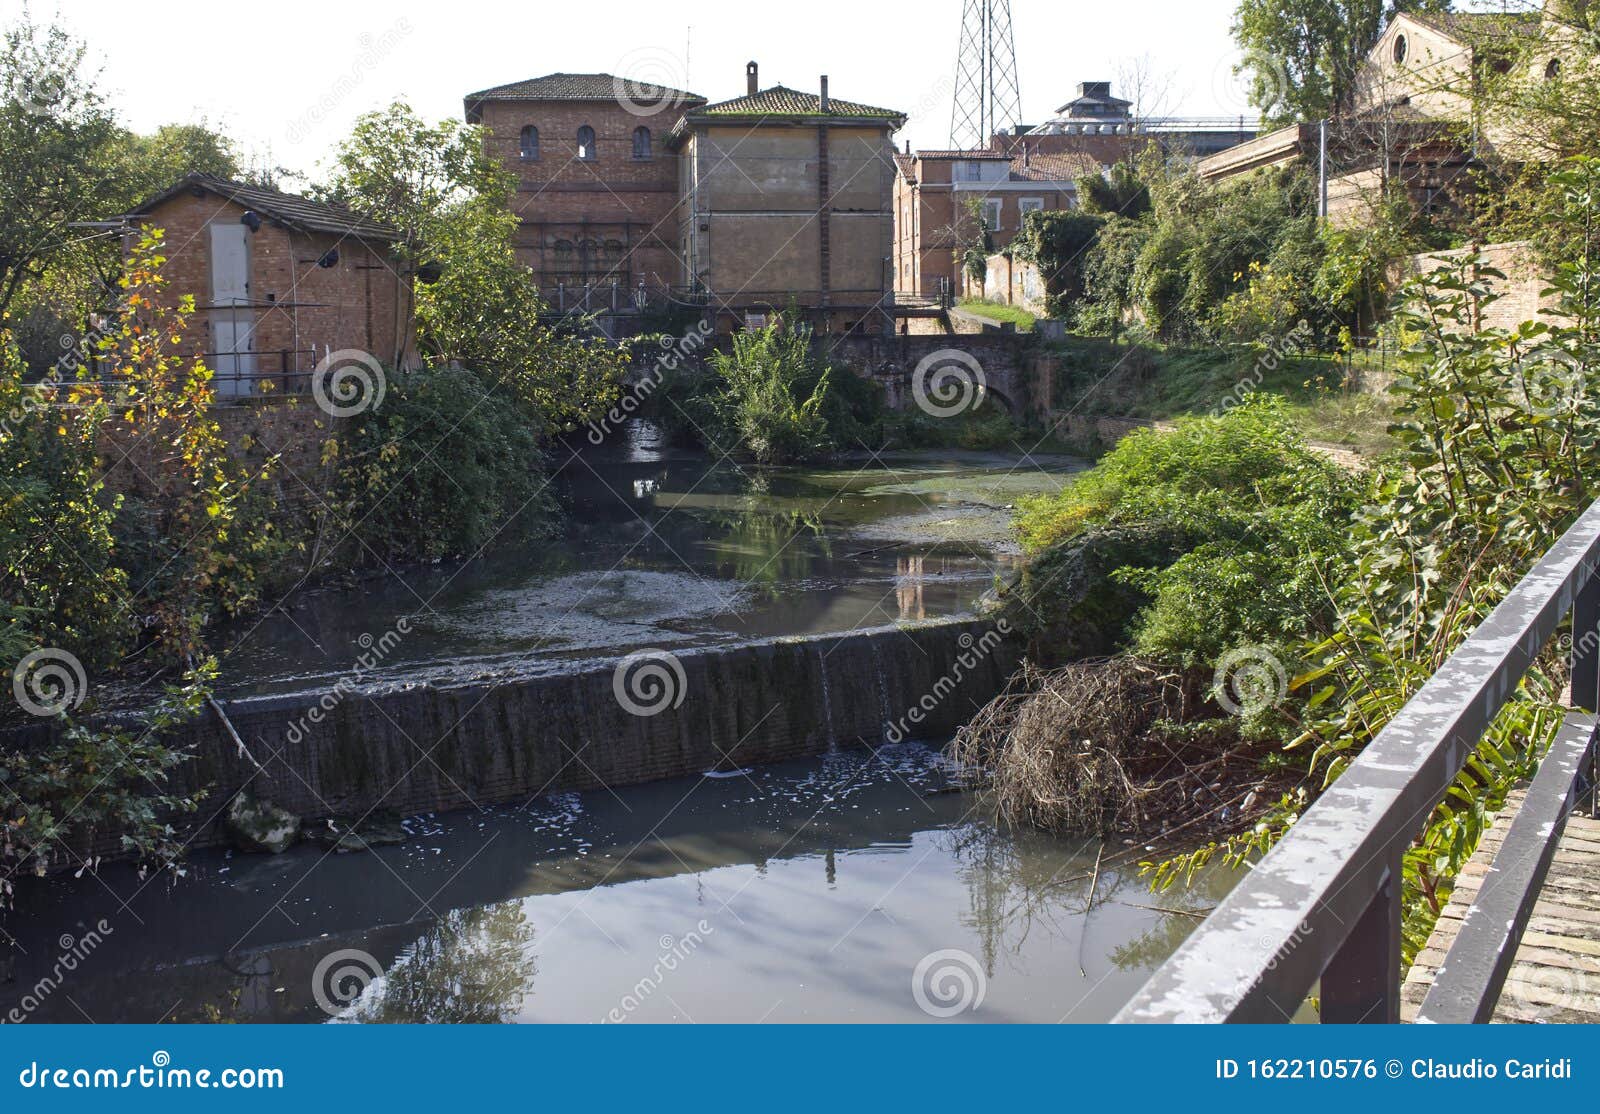 the navile canal of bologna was an important link to commercial traffic, thanks to a river lock chiusa it was navigable up to th